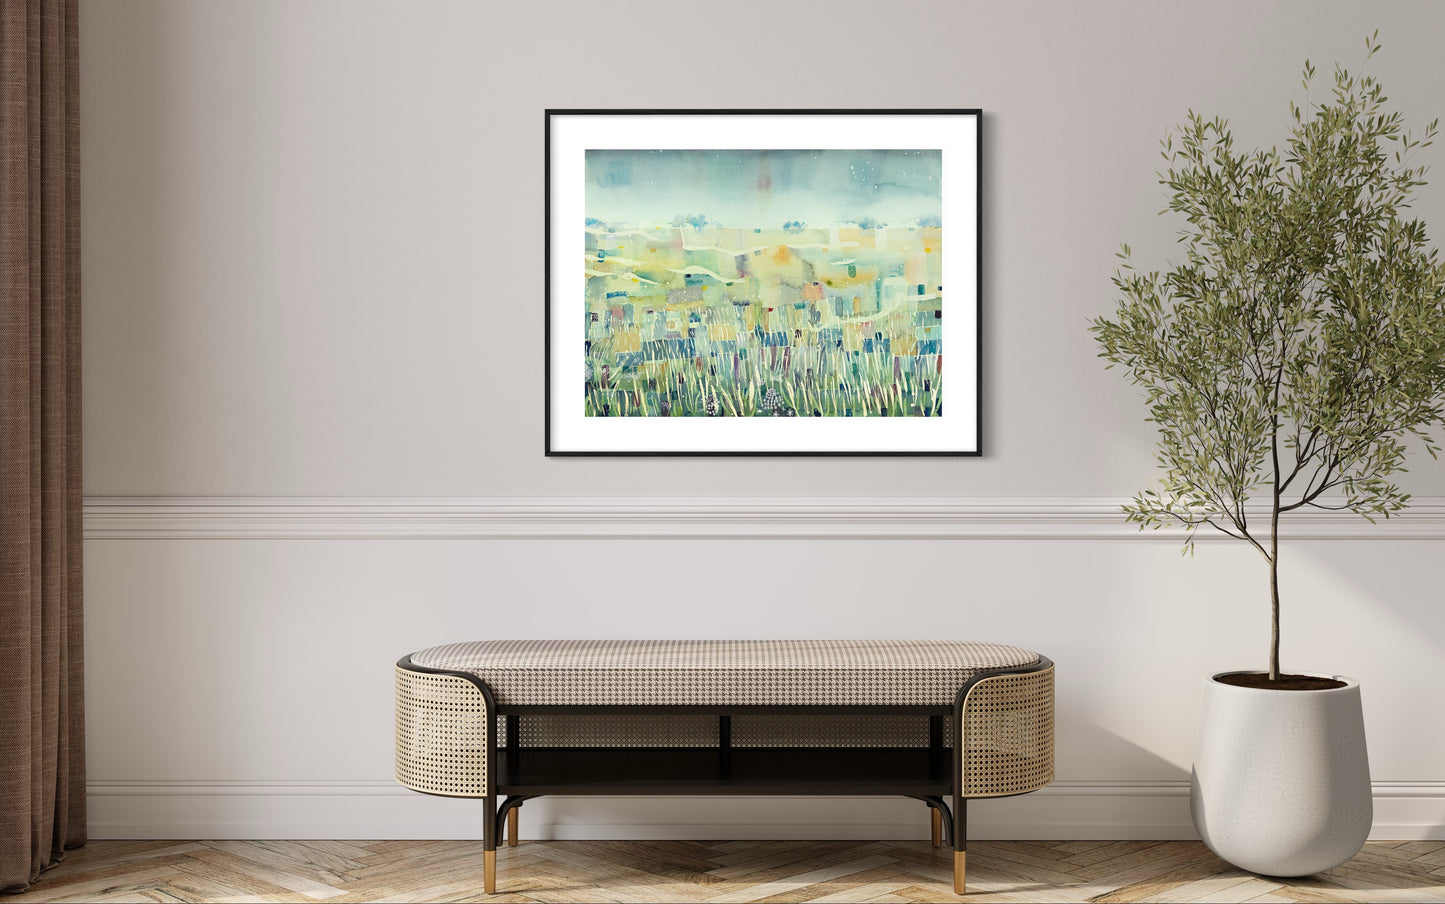 A1 Limited Edition Print - This Summer's Passage